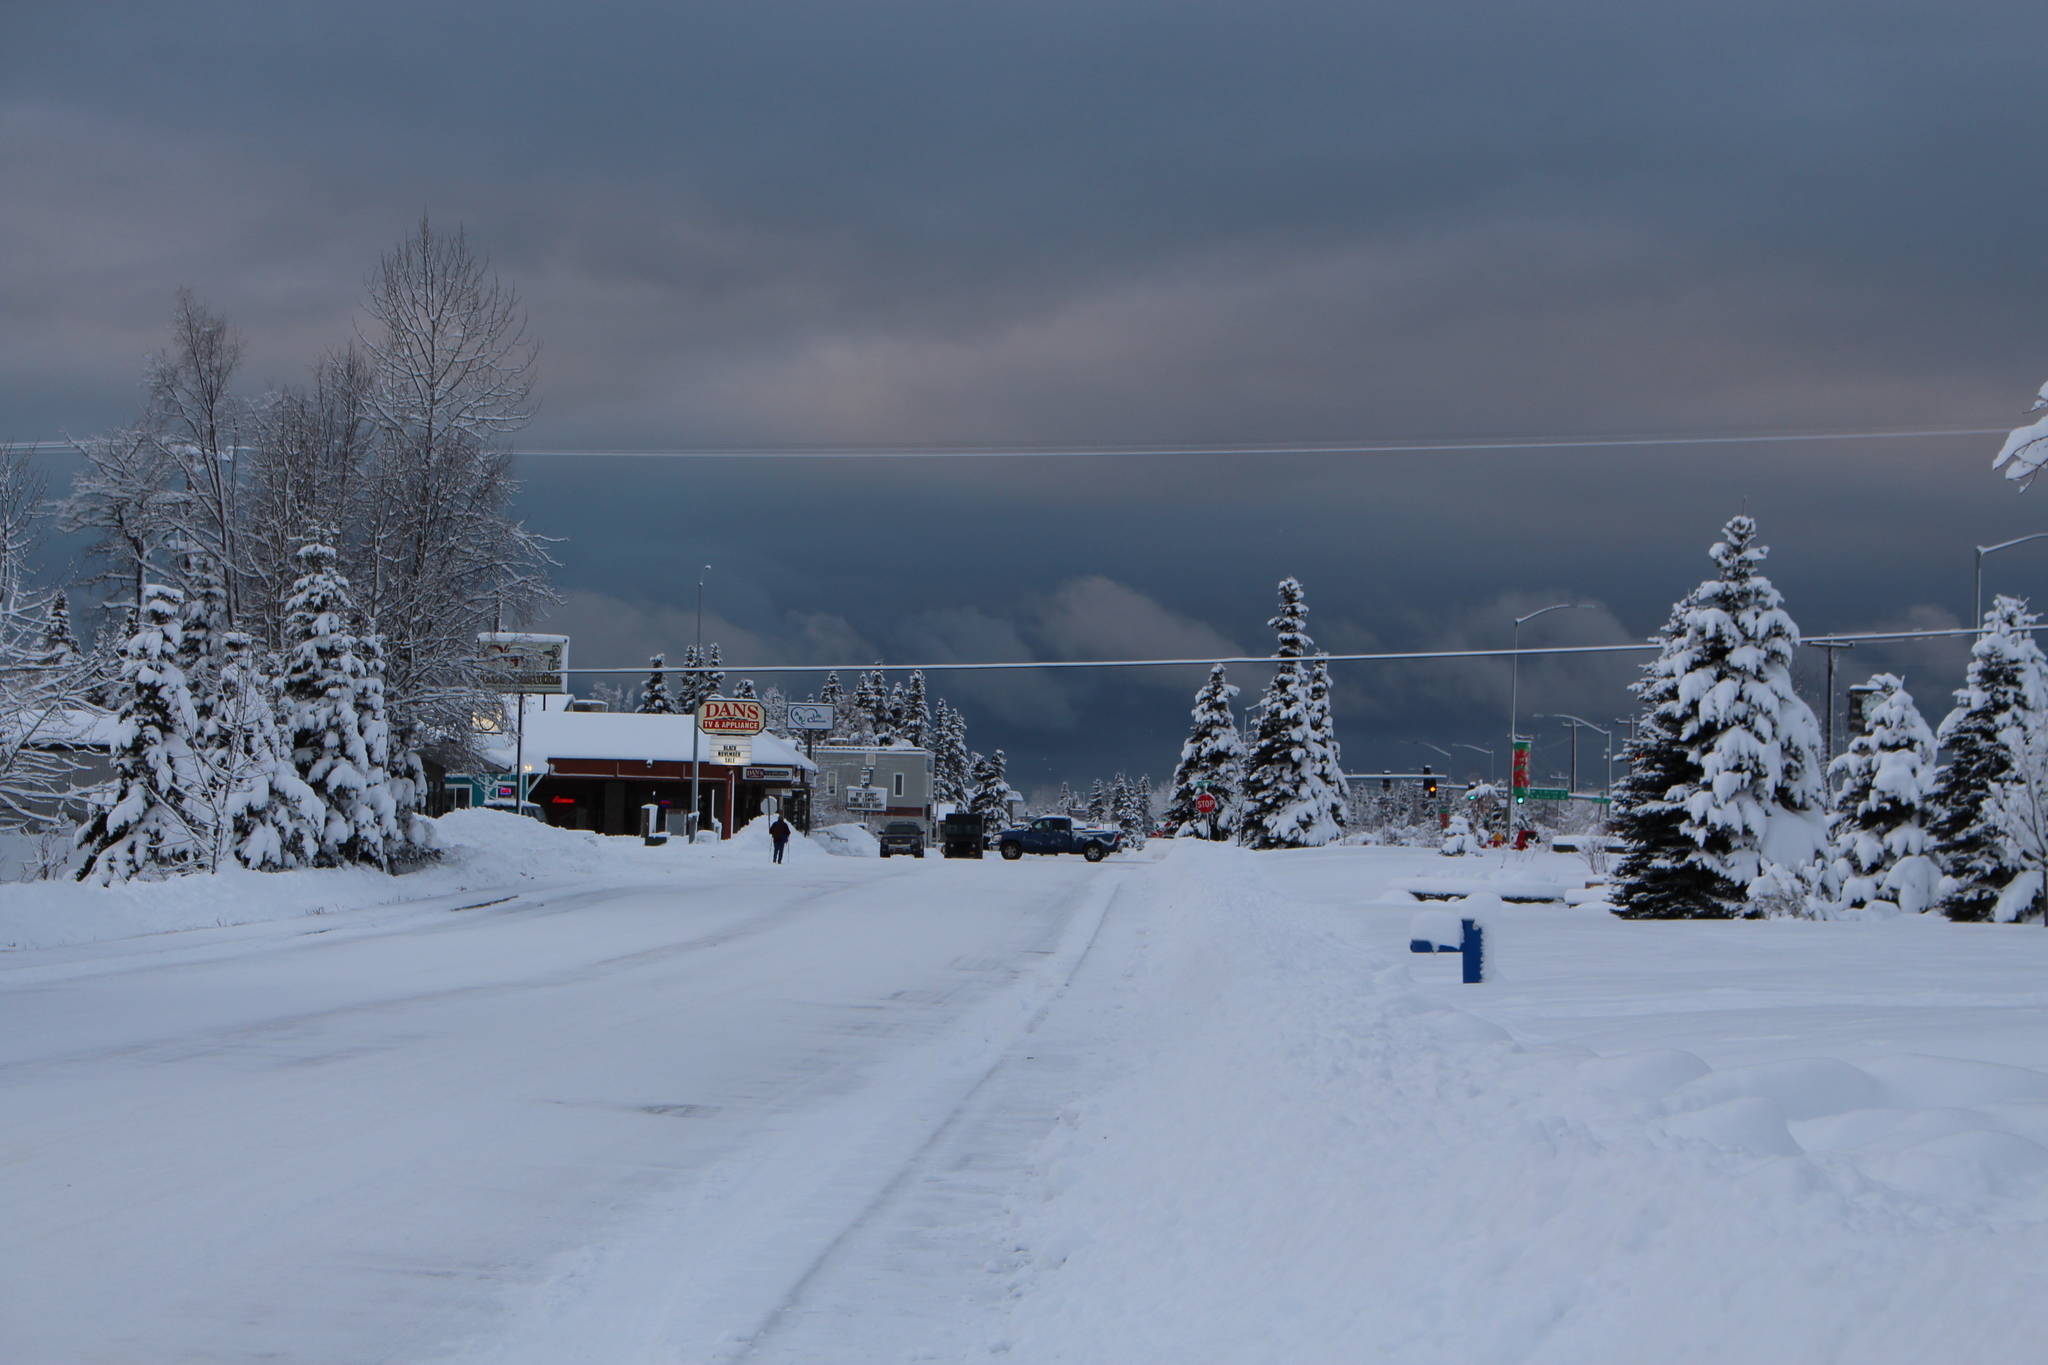 Frontage Road in Kenai, Alaska can be seen here on Dec. 3, 2019. (Photo by Brian Mazurek/Peninsula Clarion)